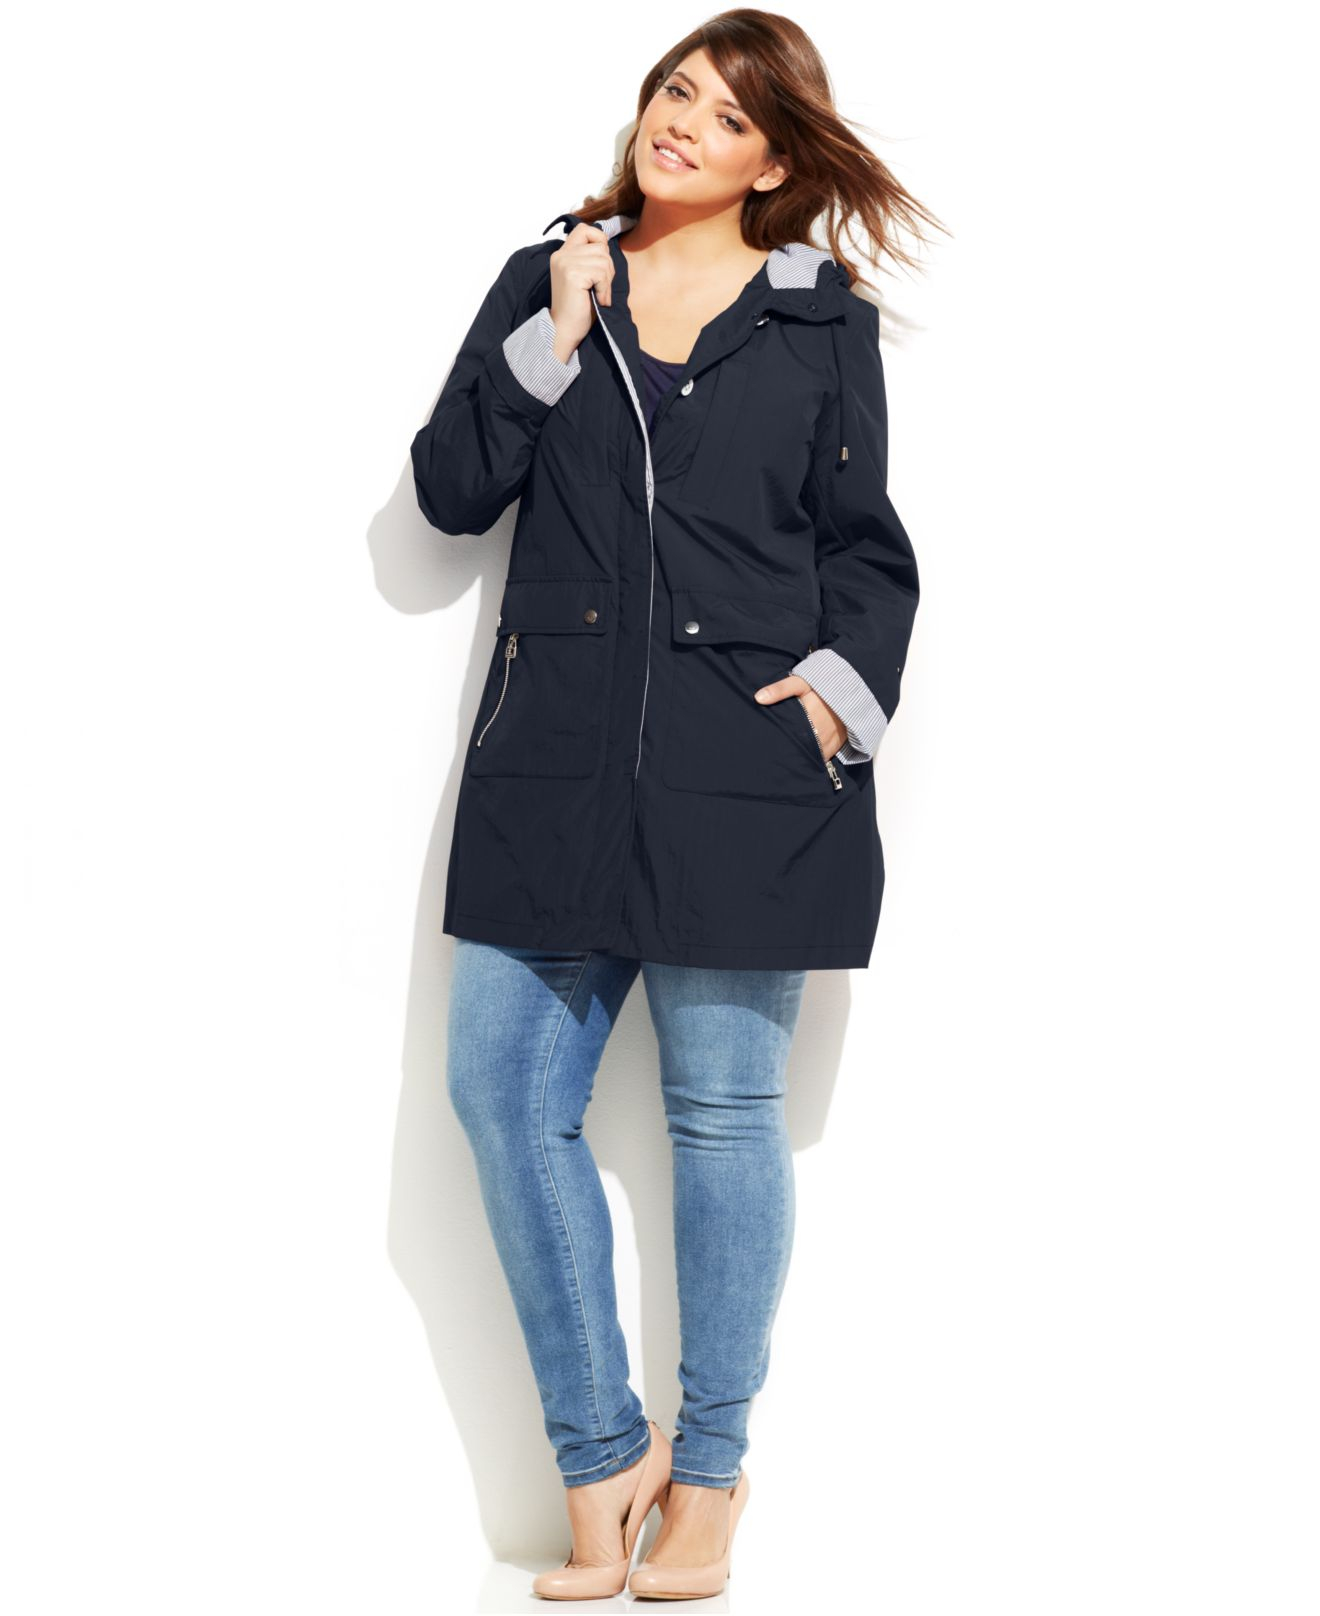 Lyst - Tommy Hilfiger Plus Size Button-Front Anorak Jacket in Blue